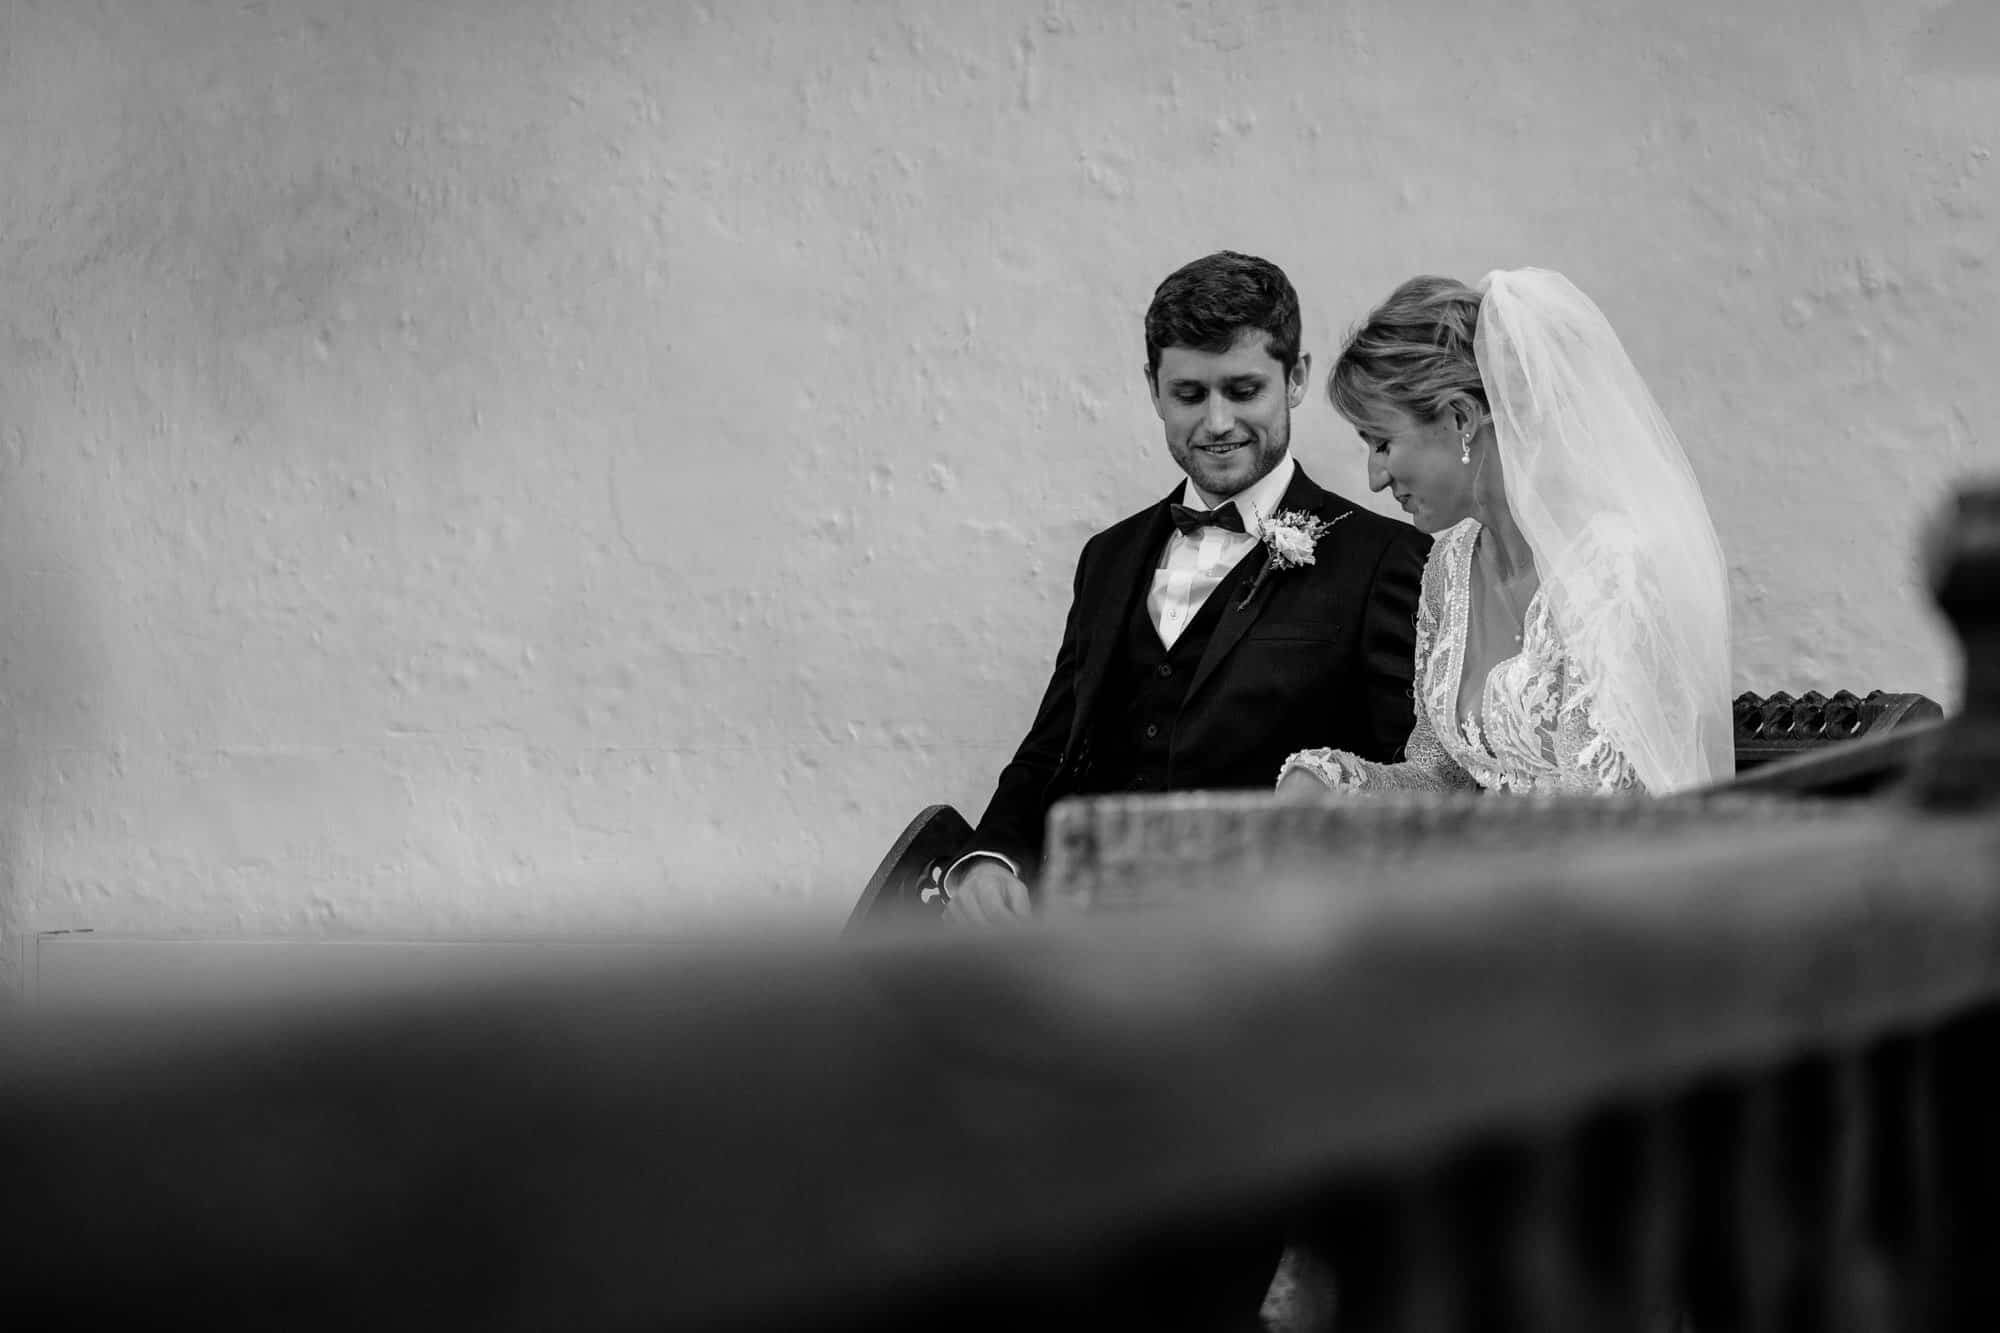 Relaxed moment between bride and groom in church